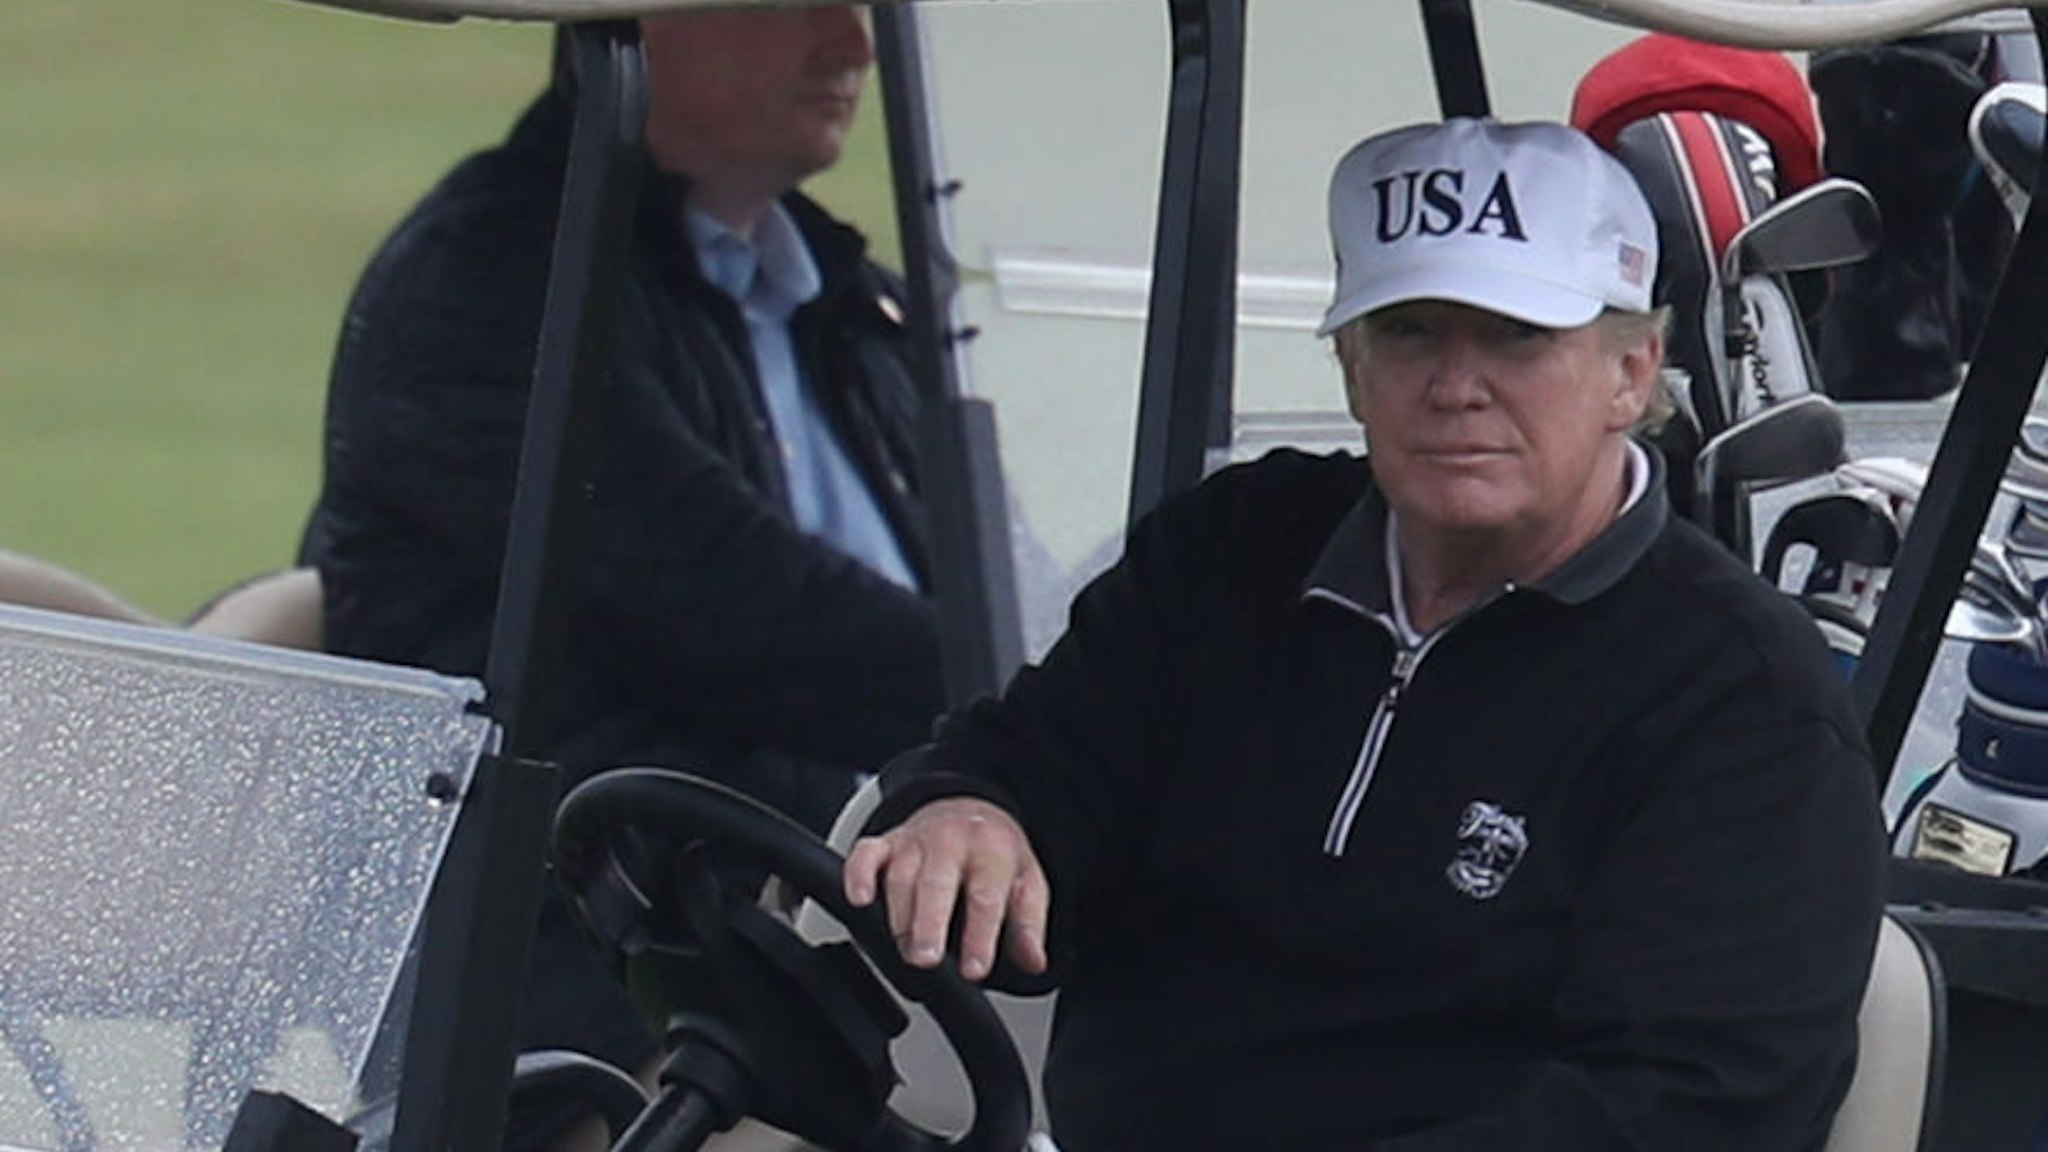 US President Donald Trump drives a golf buggy on his golf course at the Trump Turnberry resort in South Ayrshire, where he and his wife Melania, spent the weekend as part of their visit to the UK before leaving for Finland where he will meet Russian leader Vladimir Putin for talks on Monday. (Photo by Andrew Milligan/PA Images via Getty Images)